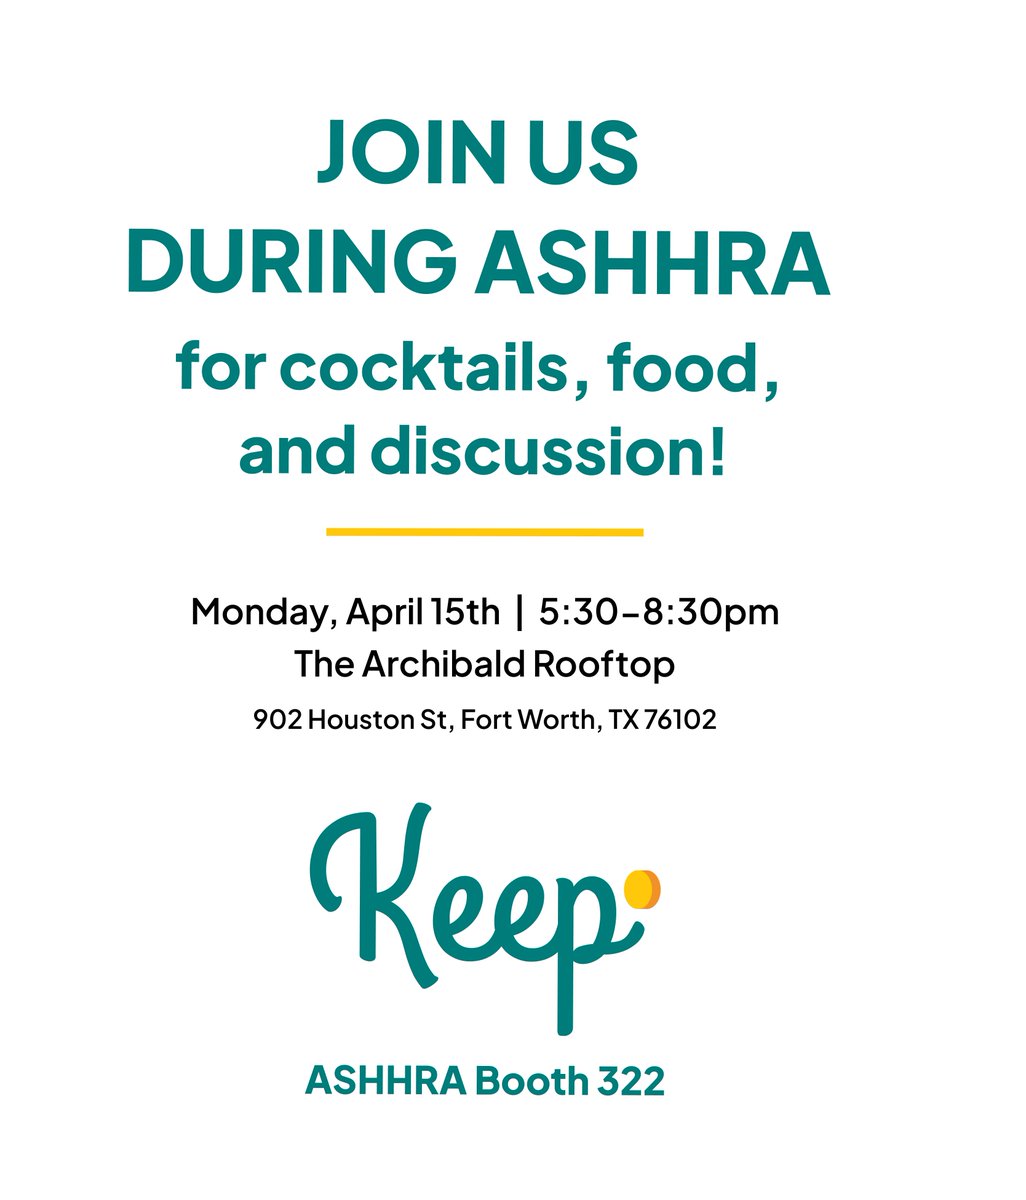 We're looking forward to #ASHHRA24 next week! Meet Keep at Booth 322 👋 and join us Monday, 5:30pm at The Archibald rooftop for free cocktails, food, and conversation - RSVP here: hubs.ly/Q02rzFCY0

#ASHHRA #HealthcareLeadership #HealthcareHR #Healthcare #Compensation